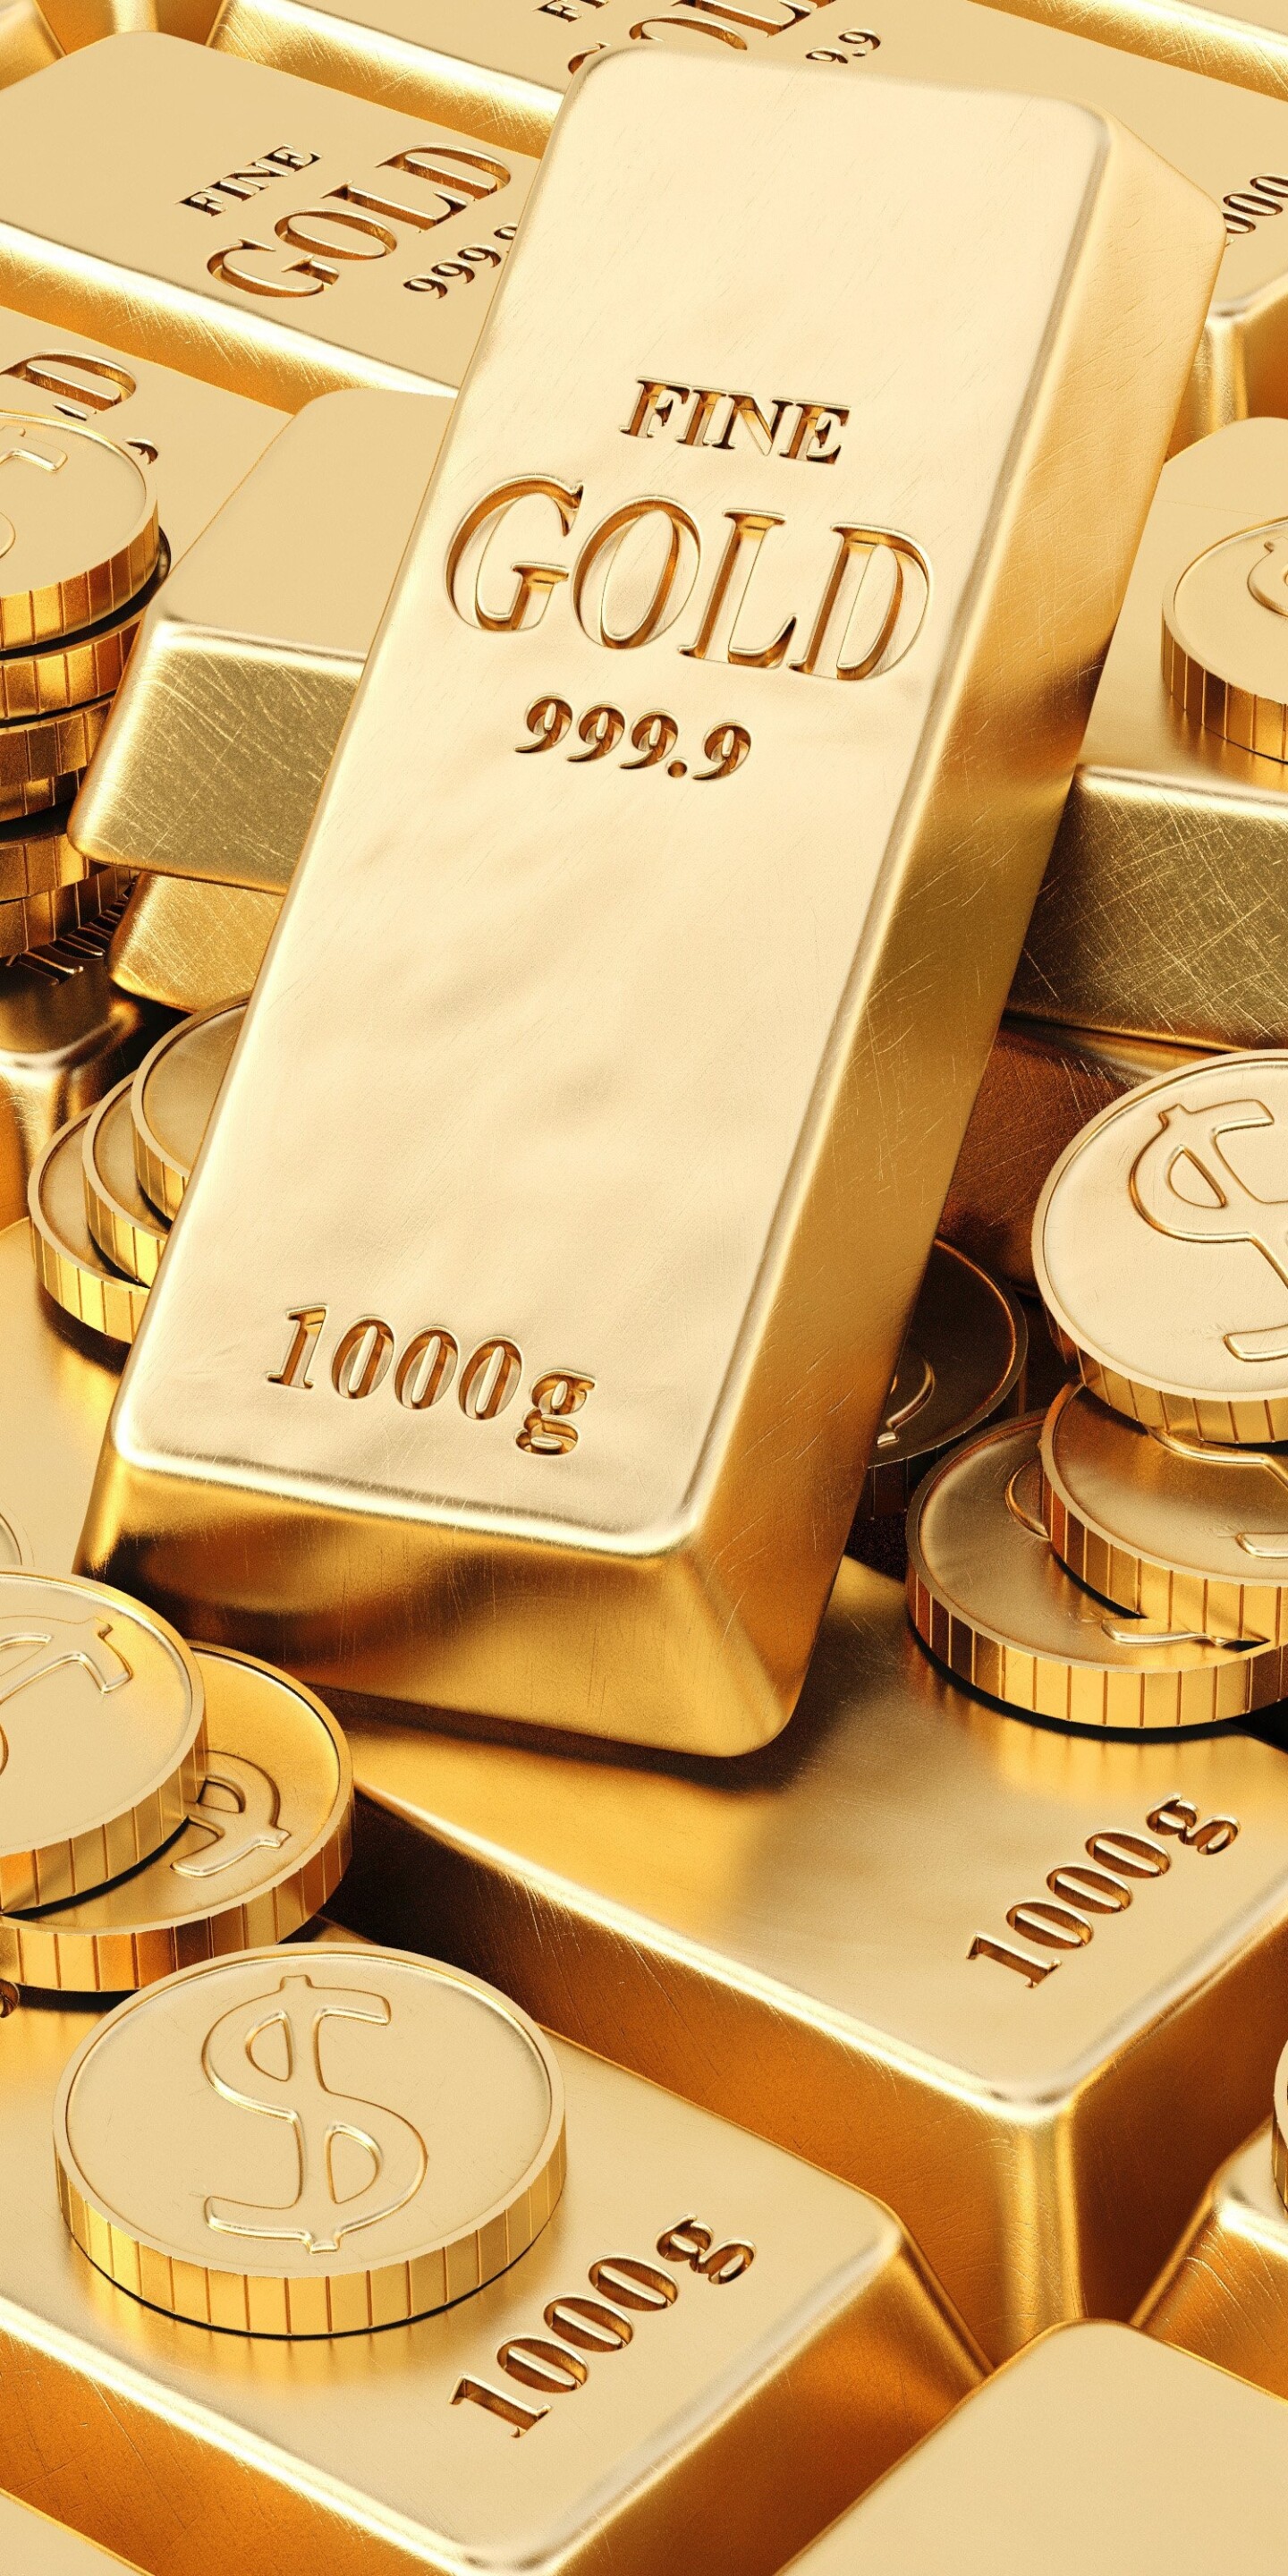 Gold: 1 kg gold bar, The Royal Mint Refinery, A quantity of refined metallic gold in rectangular shape. 1440x2880 HD Wallpaper.